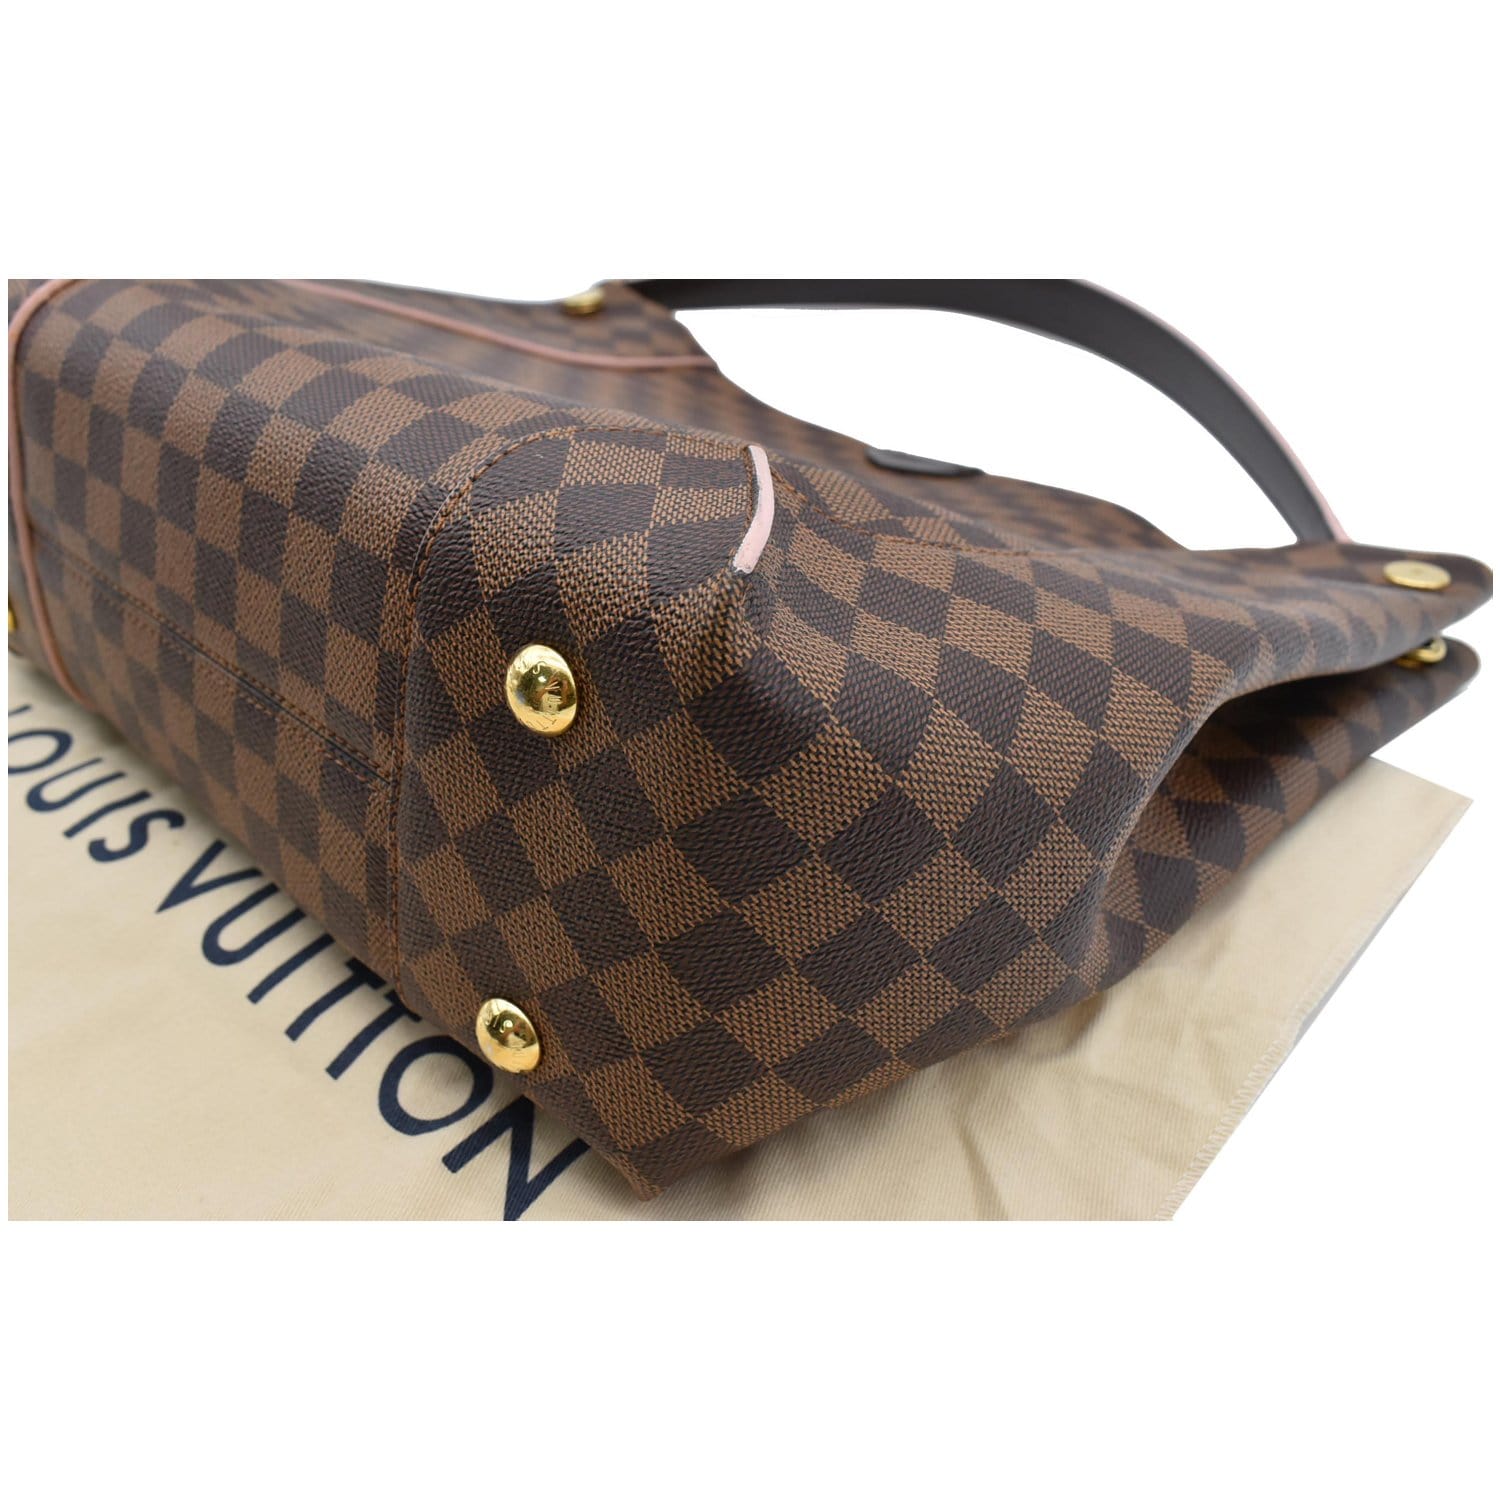 LV CAISSA HOBO $1595 full payment $1650 w/payment plan 🔥DM FOR